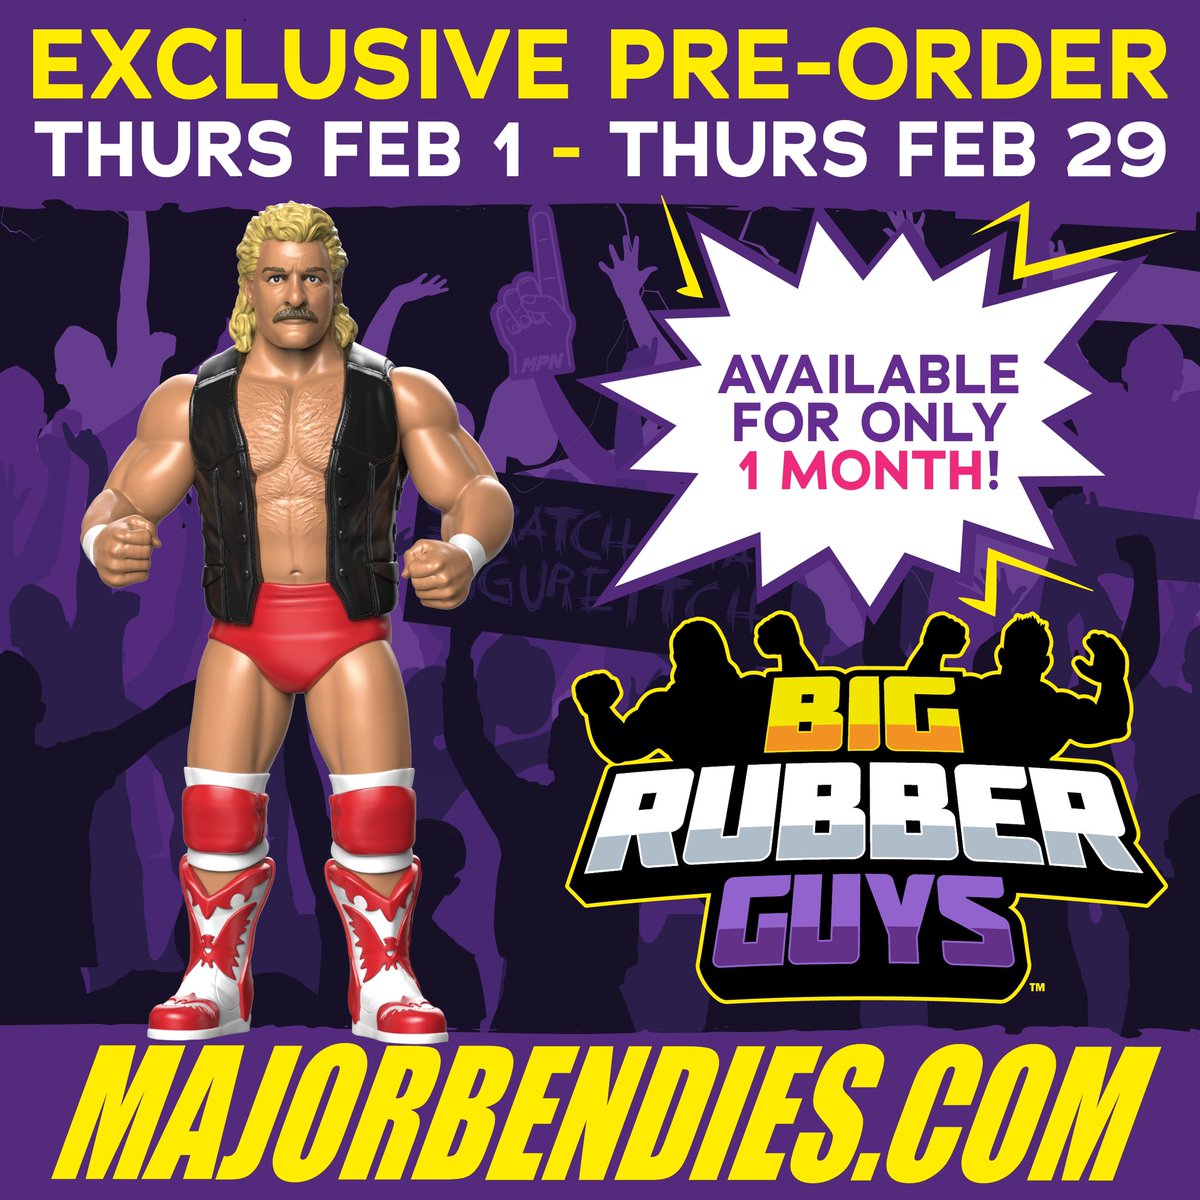 One of the next wrestlers in our #BigRubberGuys line is @therealmagnumta! A great new addition of someone who will look perfect mixed in with LJNs or any part of your collection! Pre-order yours at majorbendies.com/products/big-r… before the window closes! #ScratchThatFigureItch